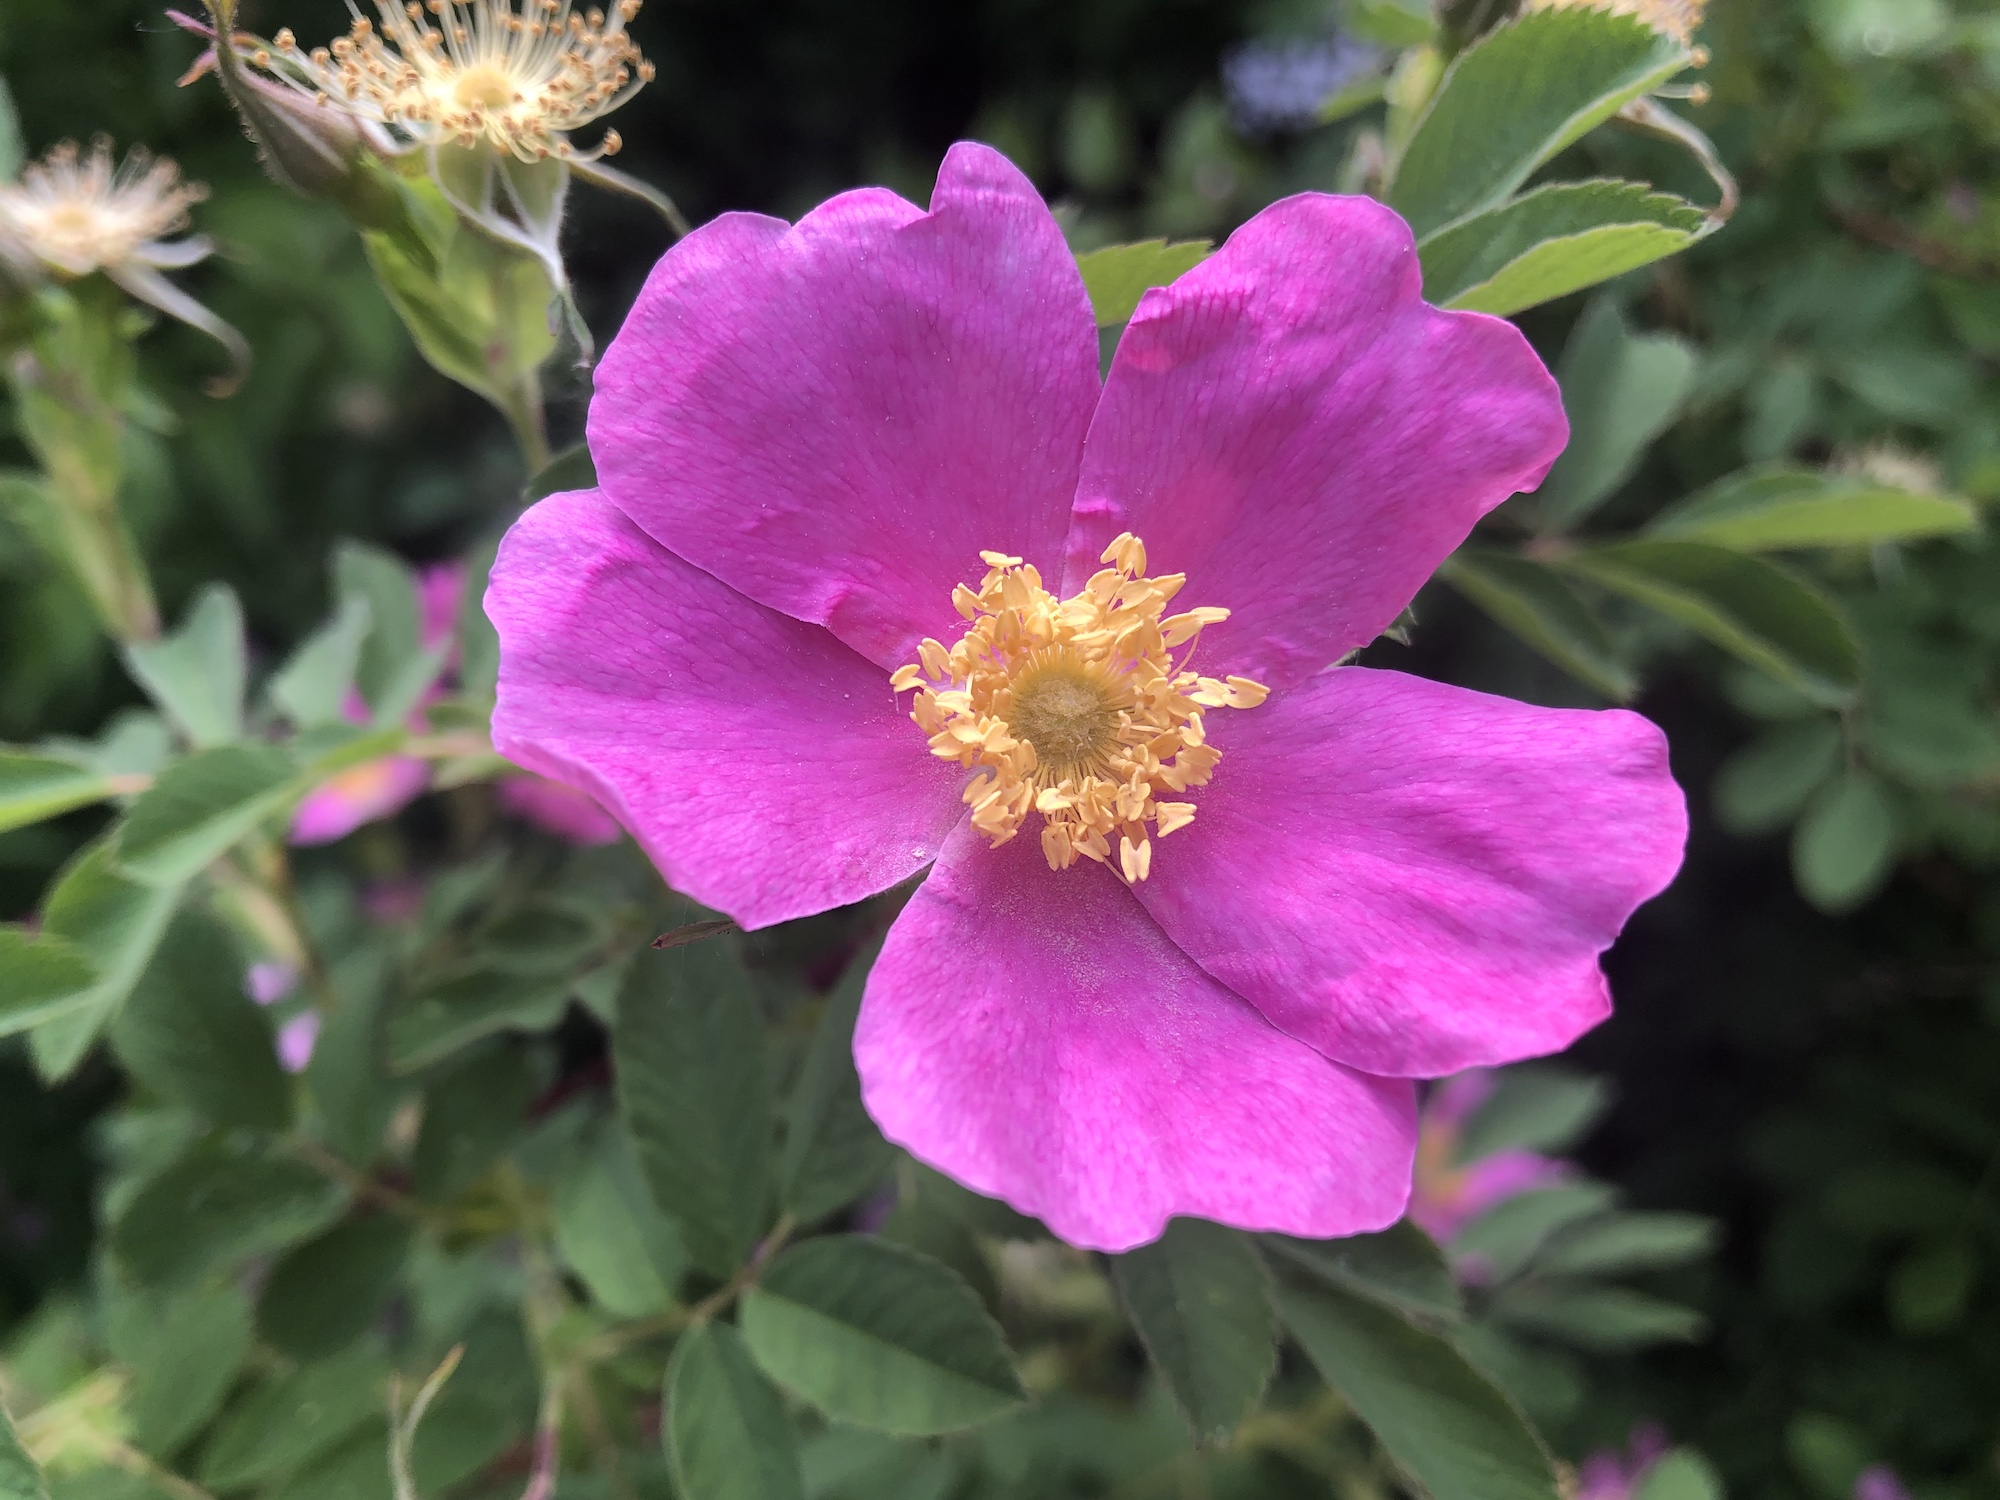 Prairie Rose (Rosa arkansana) by Duck Pond stone wall in Madison, Wisconsin on June 7, 2020.